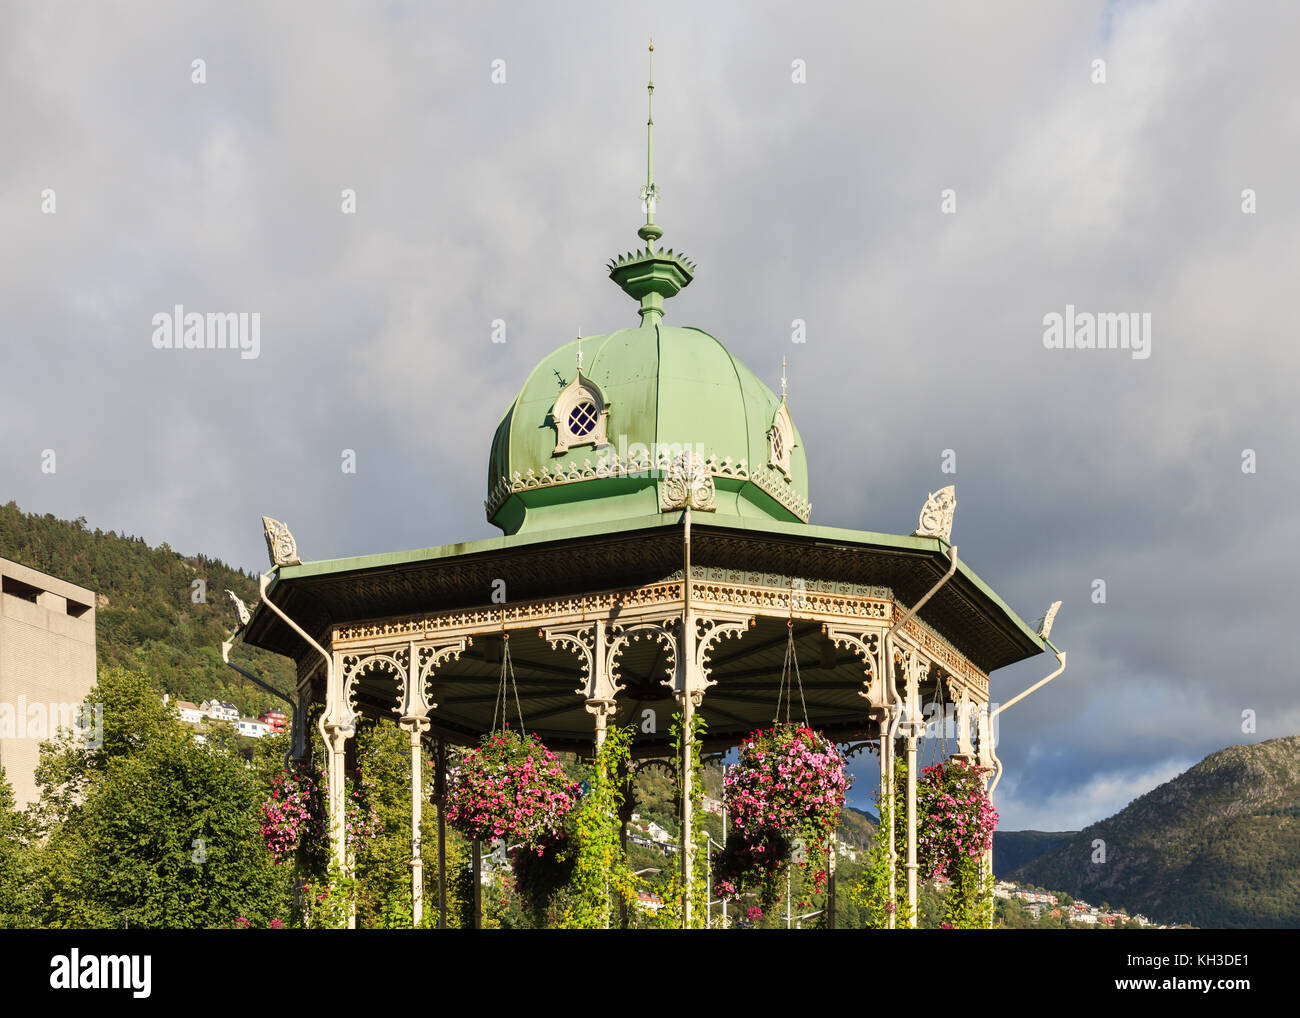 Bergen Bandstand.  A bandstand decorated with flowers in Byparken, Bergen in Norway. Stock Photo